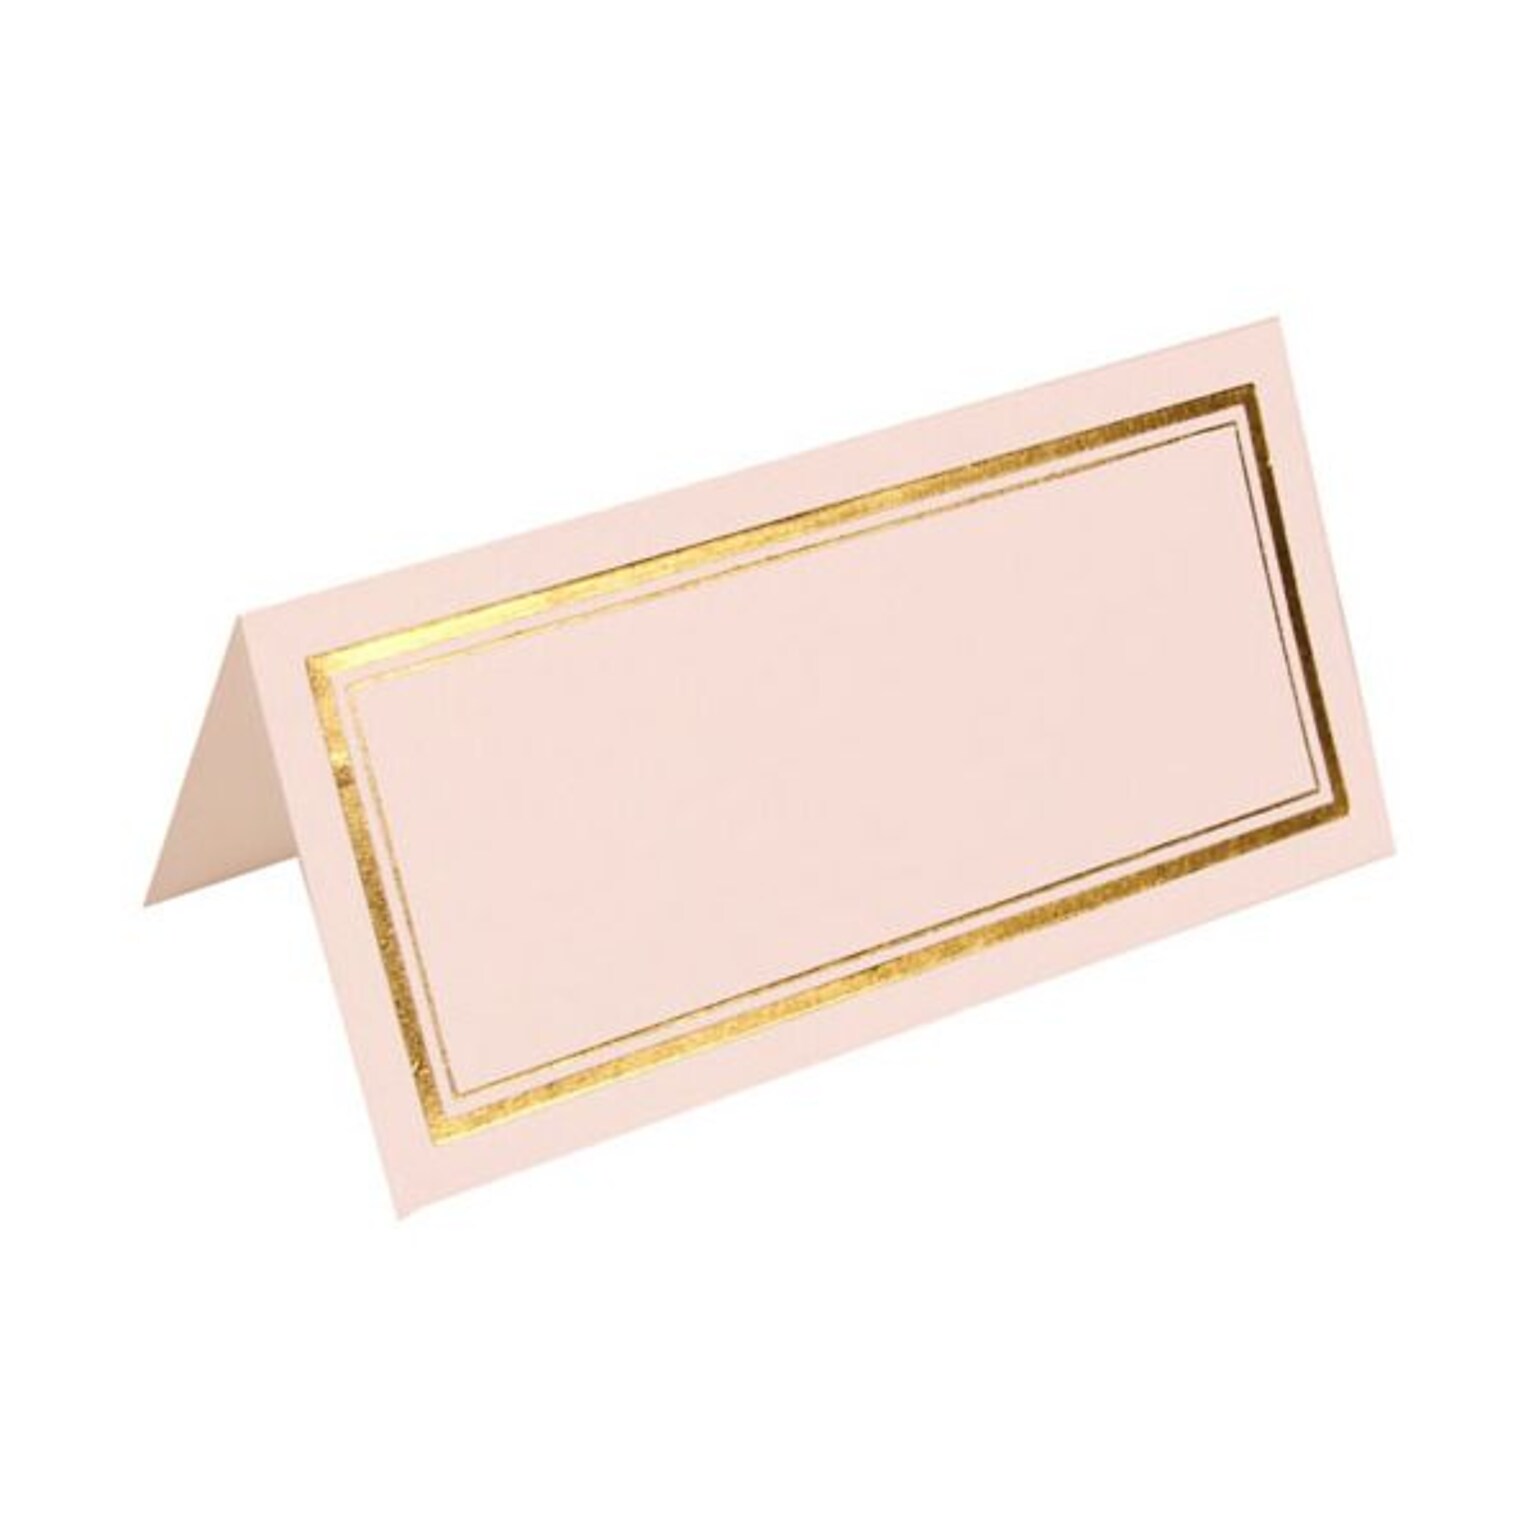 JAM Paper® Foldover Placecards, 2 x 4.25, White with Double Gold Border place cards, 100/pack (312125229)